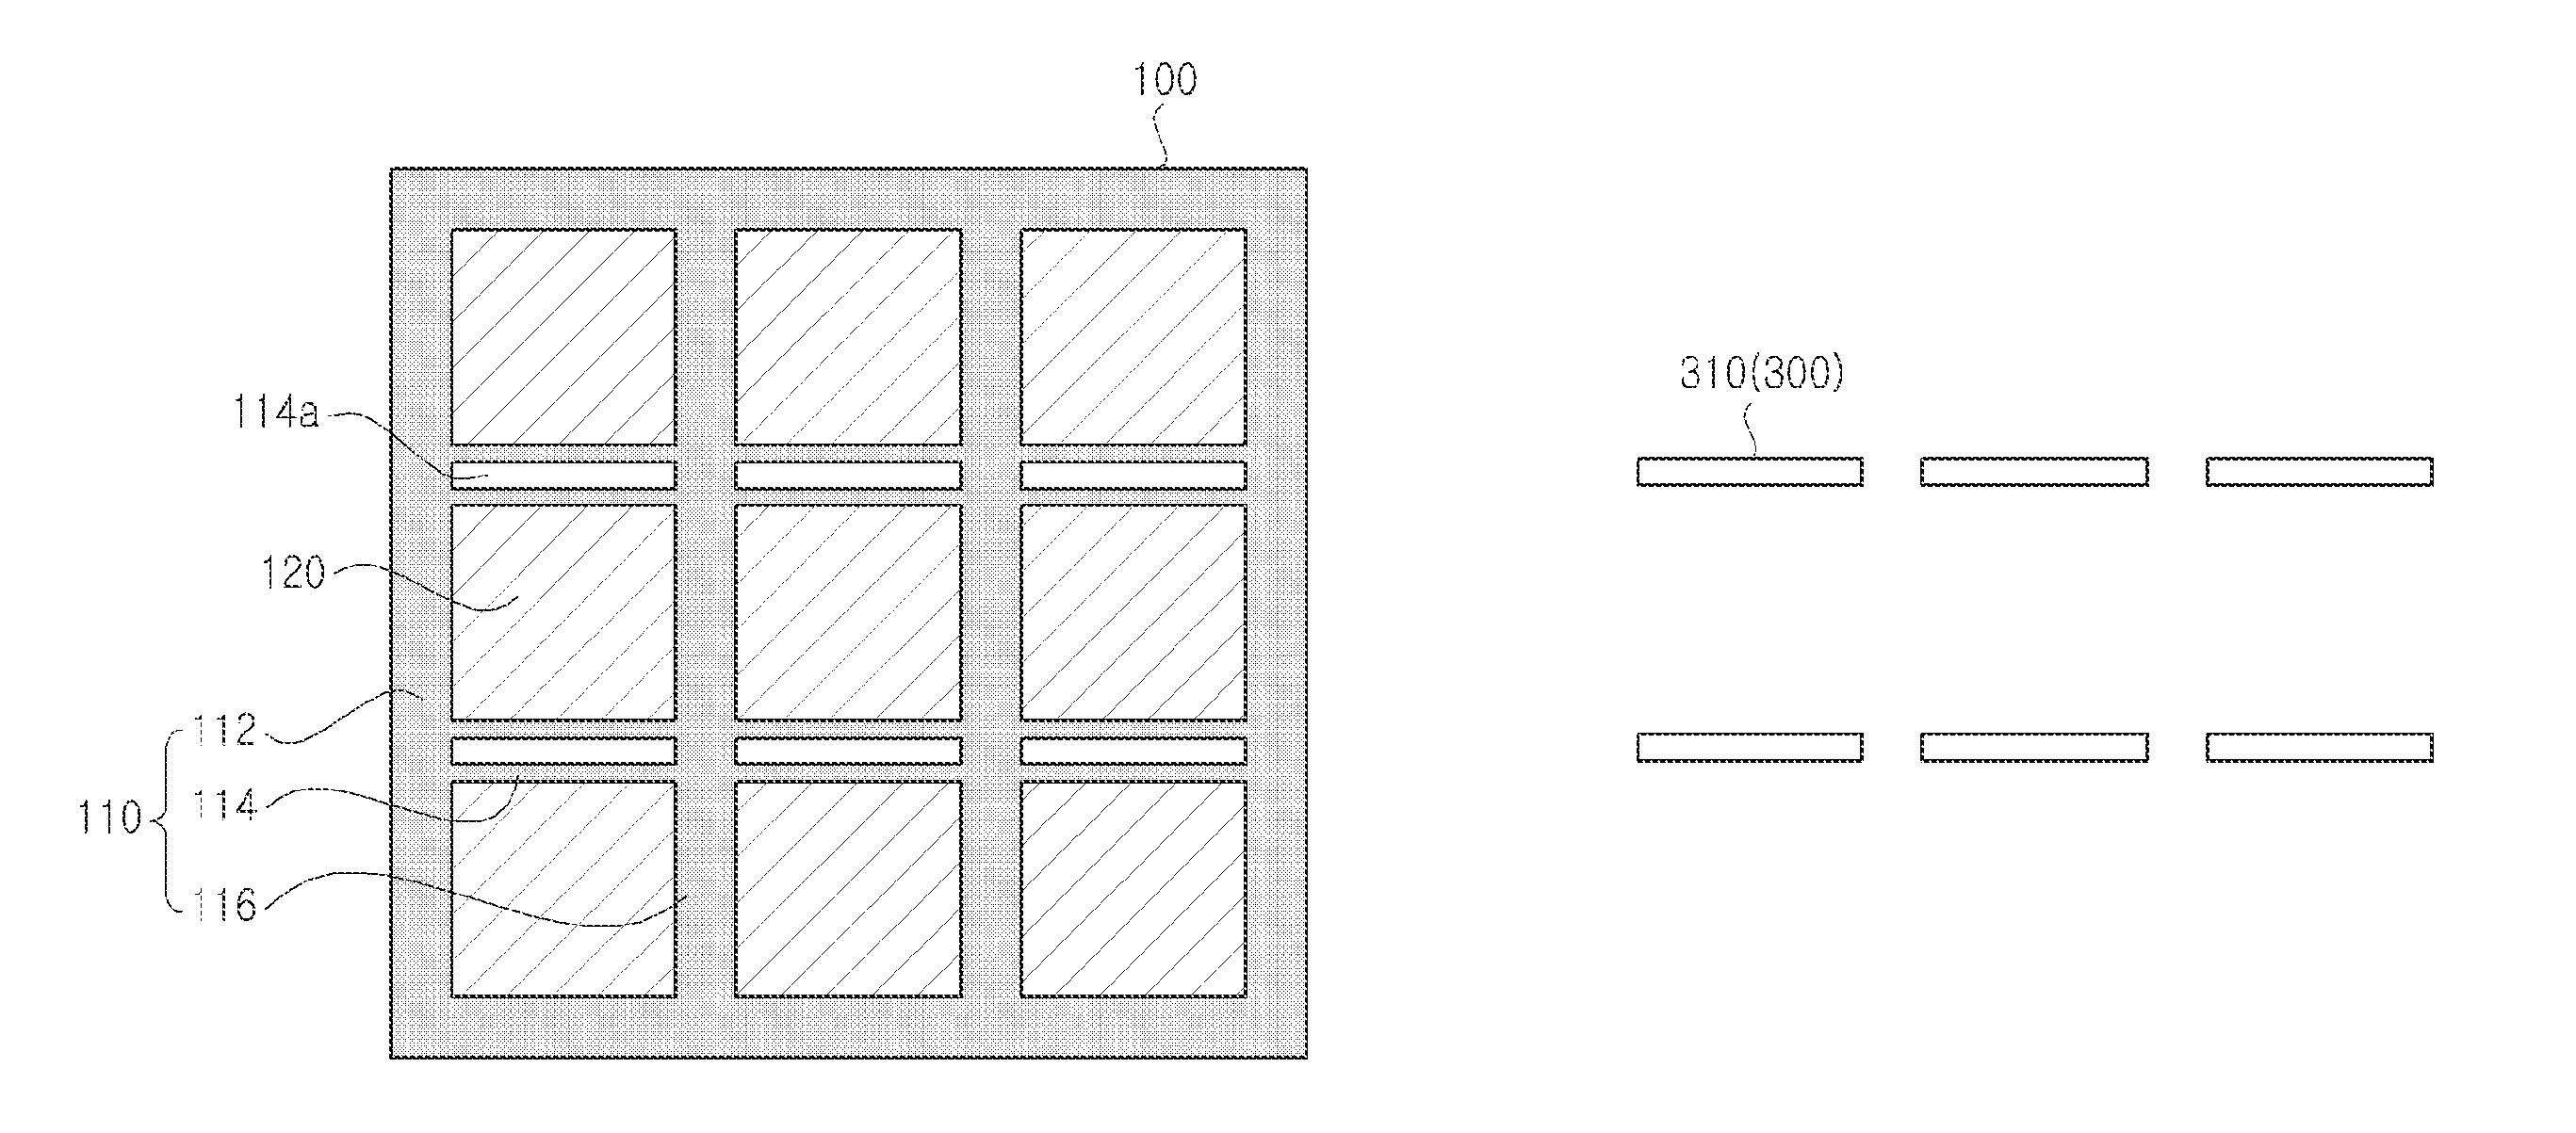 Liquid crystal display device and method of manufacturing the same